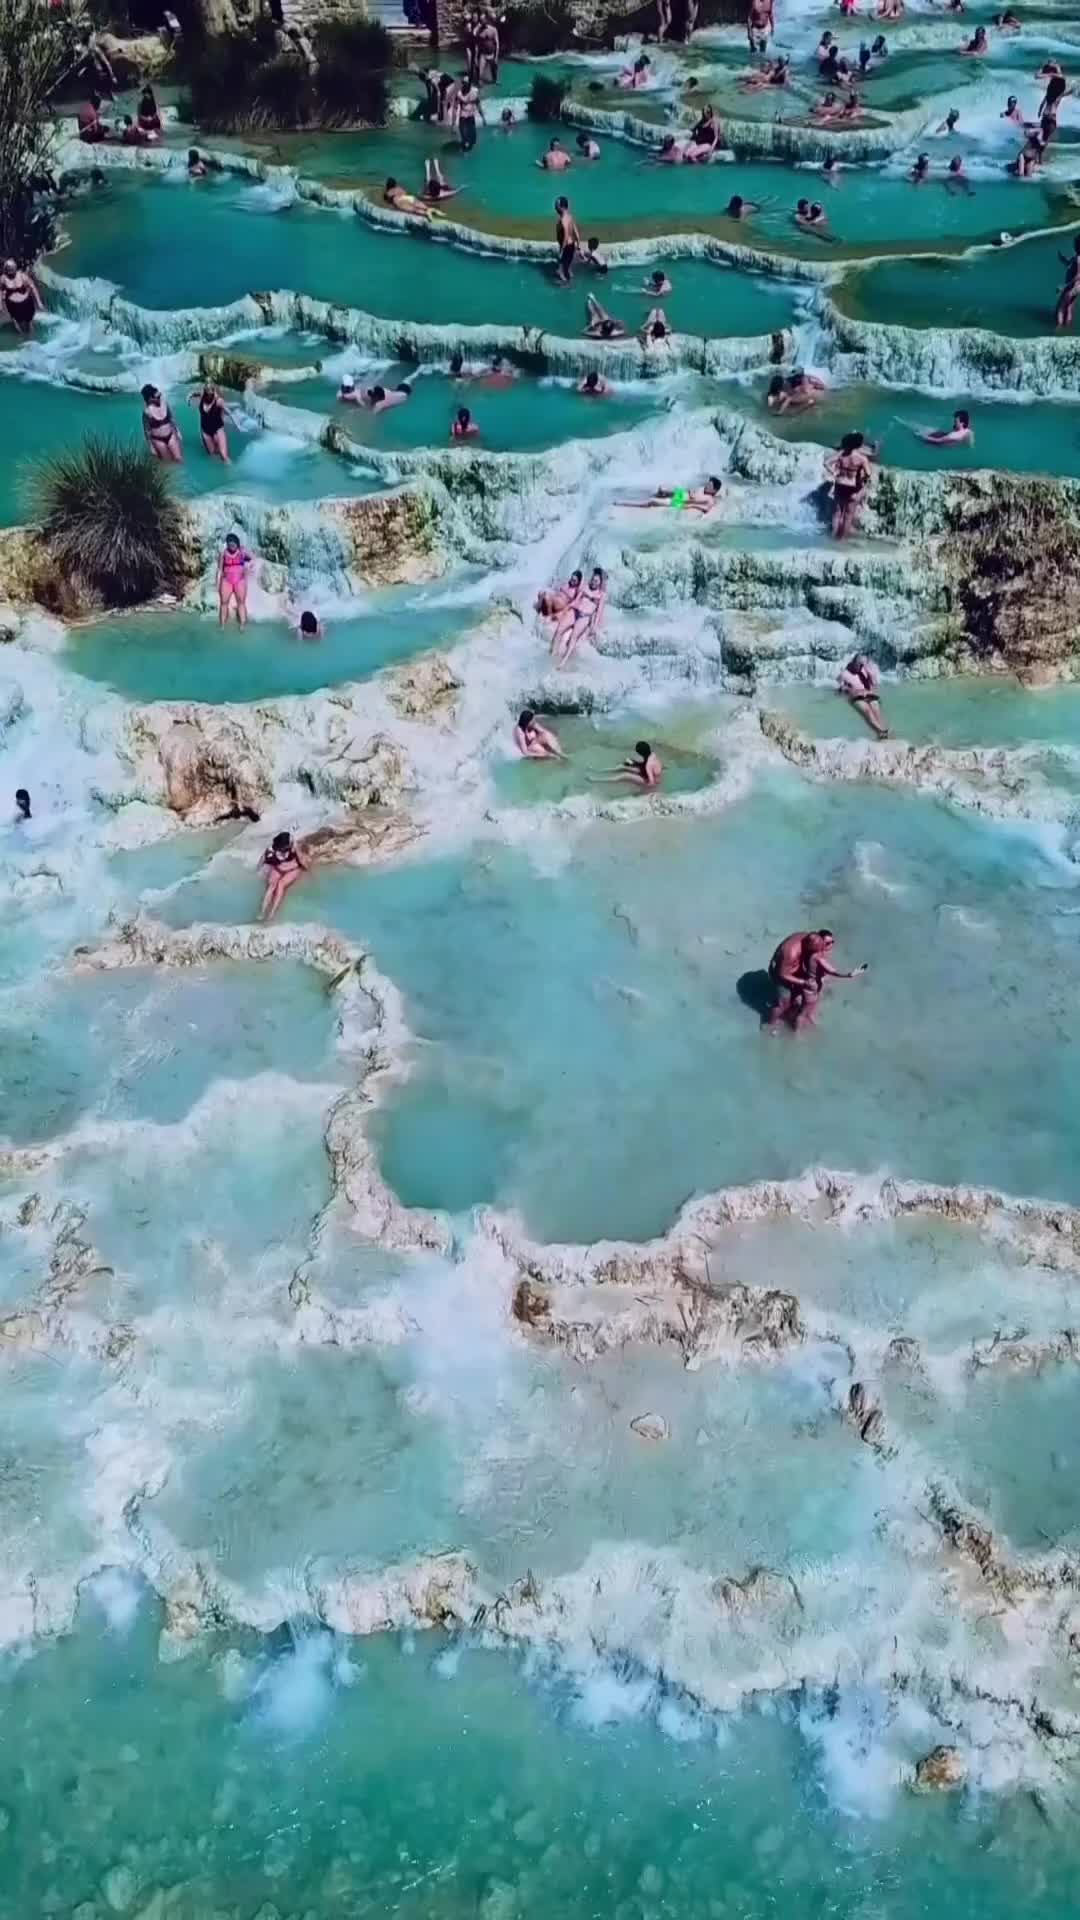 Relax at Saturnia Hot Springs in Tuscany, Italy